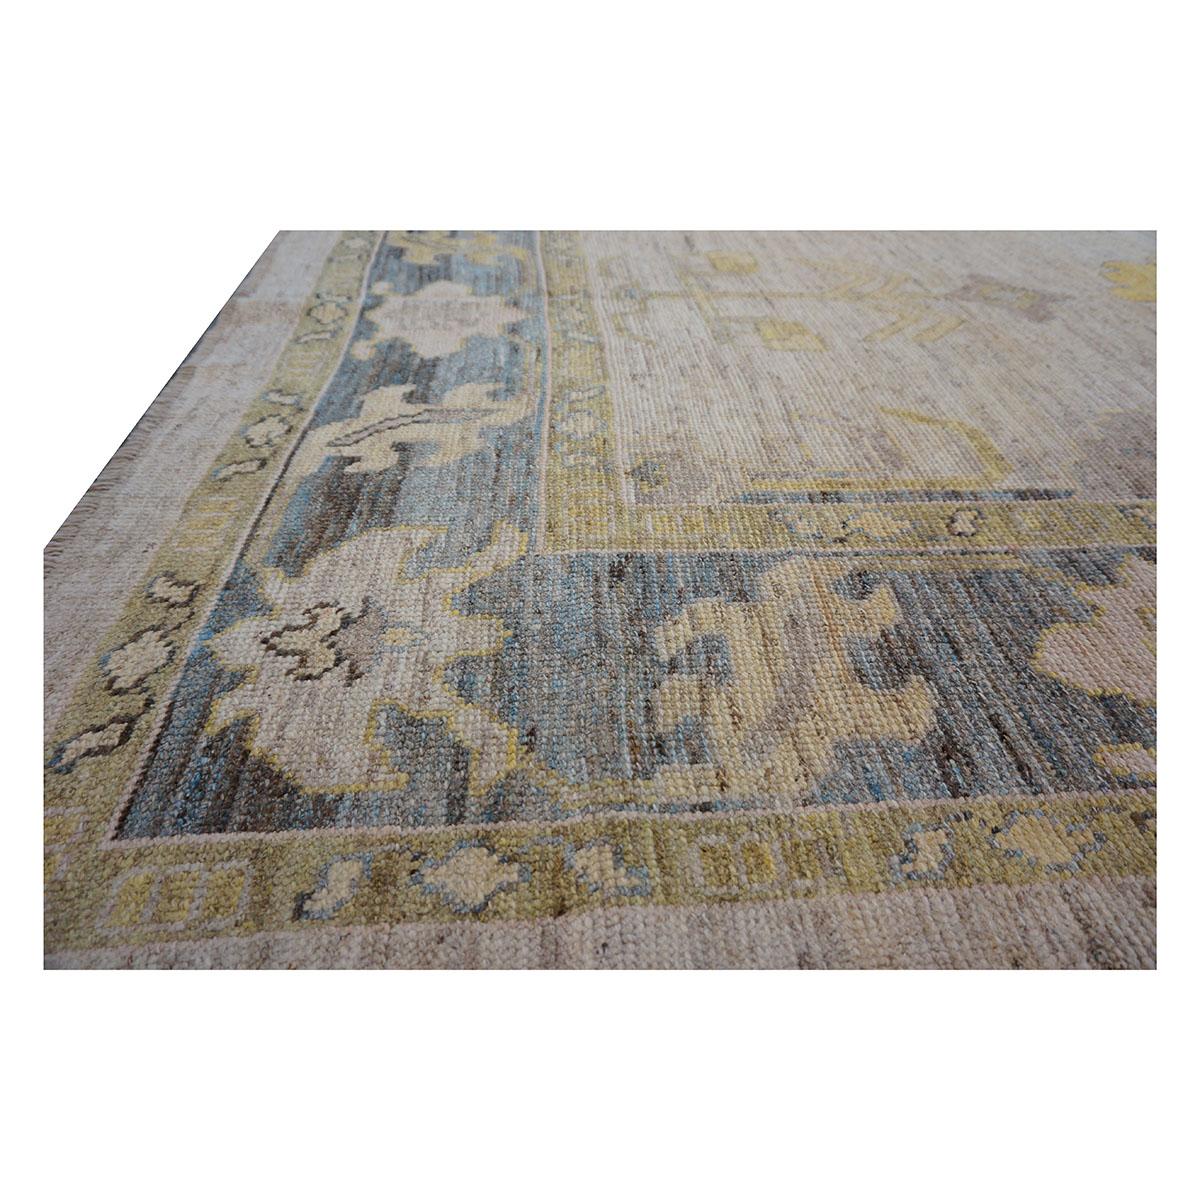 21st Century Turkish Oushak 10x13 Ivory, Grey, & Yellow Handmade Area Rug In Good Condition For Sale In Houston, TX